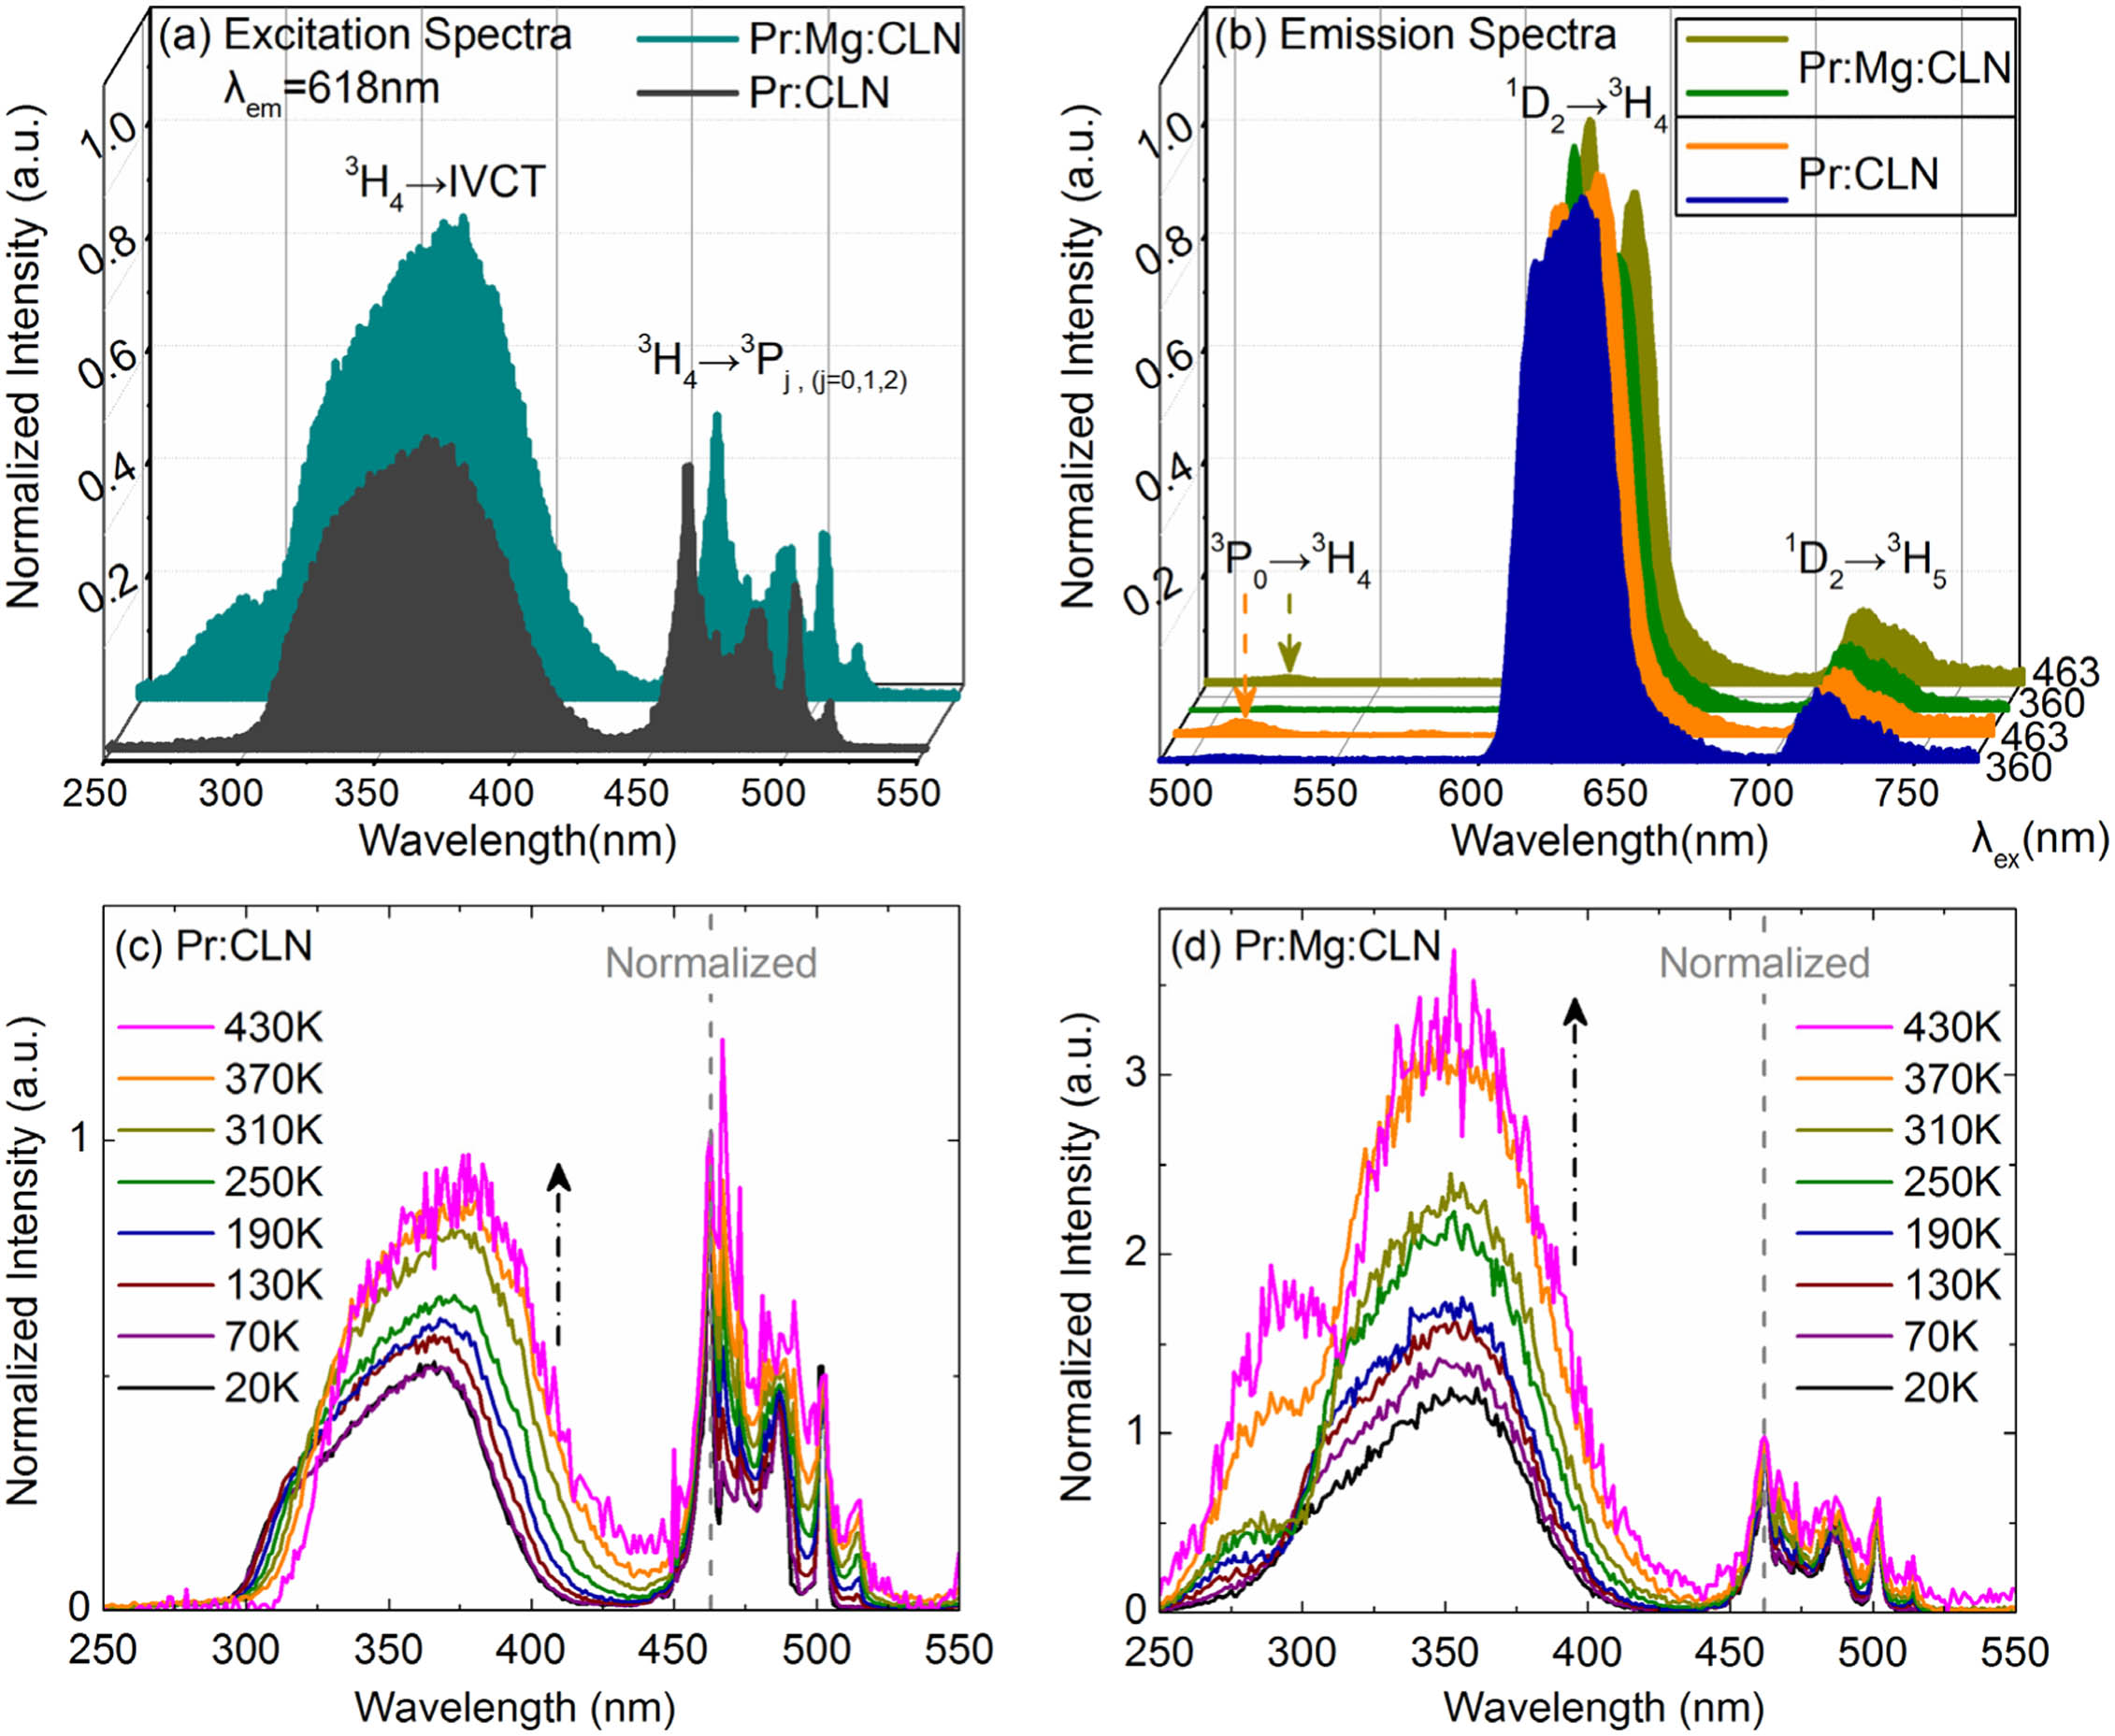 Temperature-dependent excitation and emission spectra. The normalized fluorescence (a) excitation spectra monitored at 618 nm and (b) emission spectra under 360 and 463 nm excitations at room temperature for Pr:CLN and Pr:Mg:CLN. The temperature-dependent excitation spectra of (c) Pr:CLN and (d) Pr:Mg:CLN monitored at 618 nm at temperatures ranging from 20 to 430 K. The spectra are normalized with respect to the (c), (d) 463 nm excitation peaks.